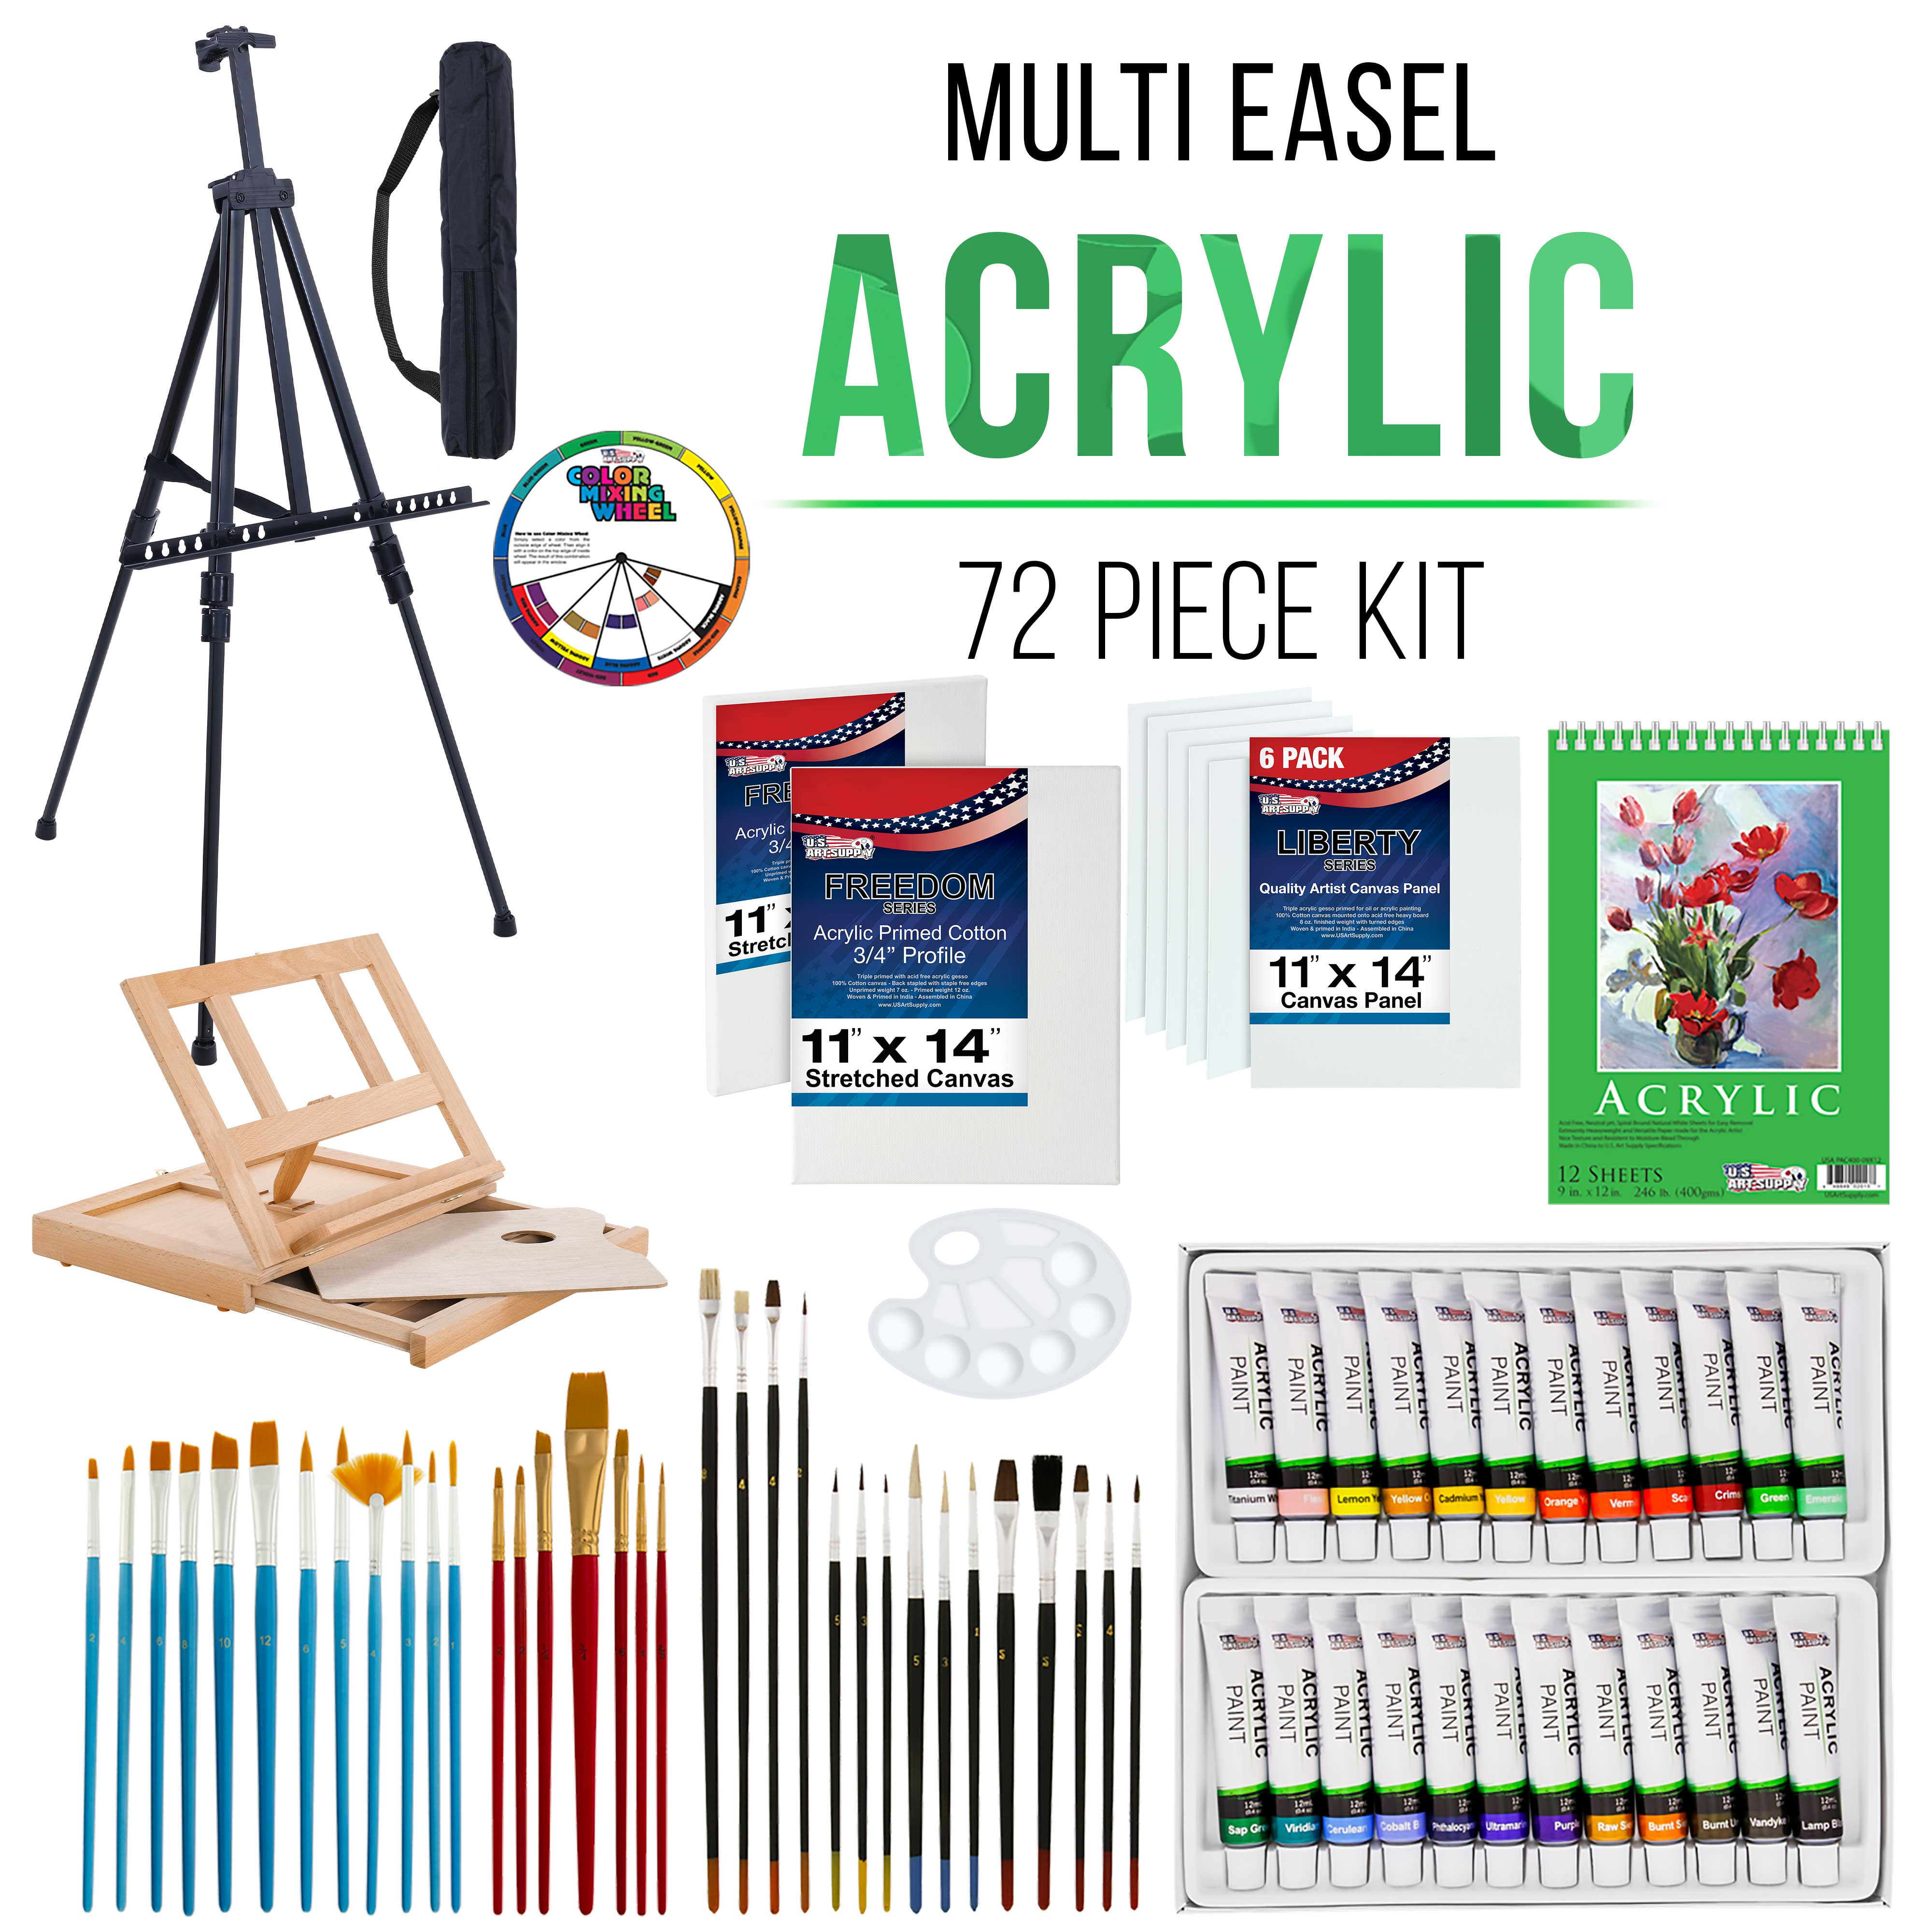 US Art Supply 21-Piece Oil Painting Set with Table Easel, Canvas, 12 Colors